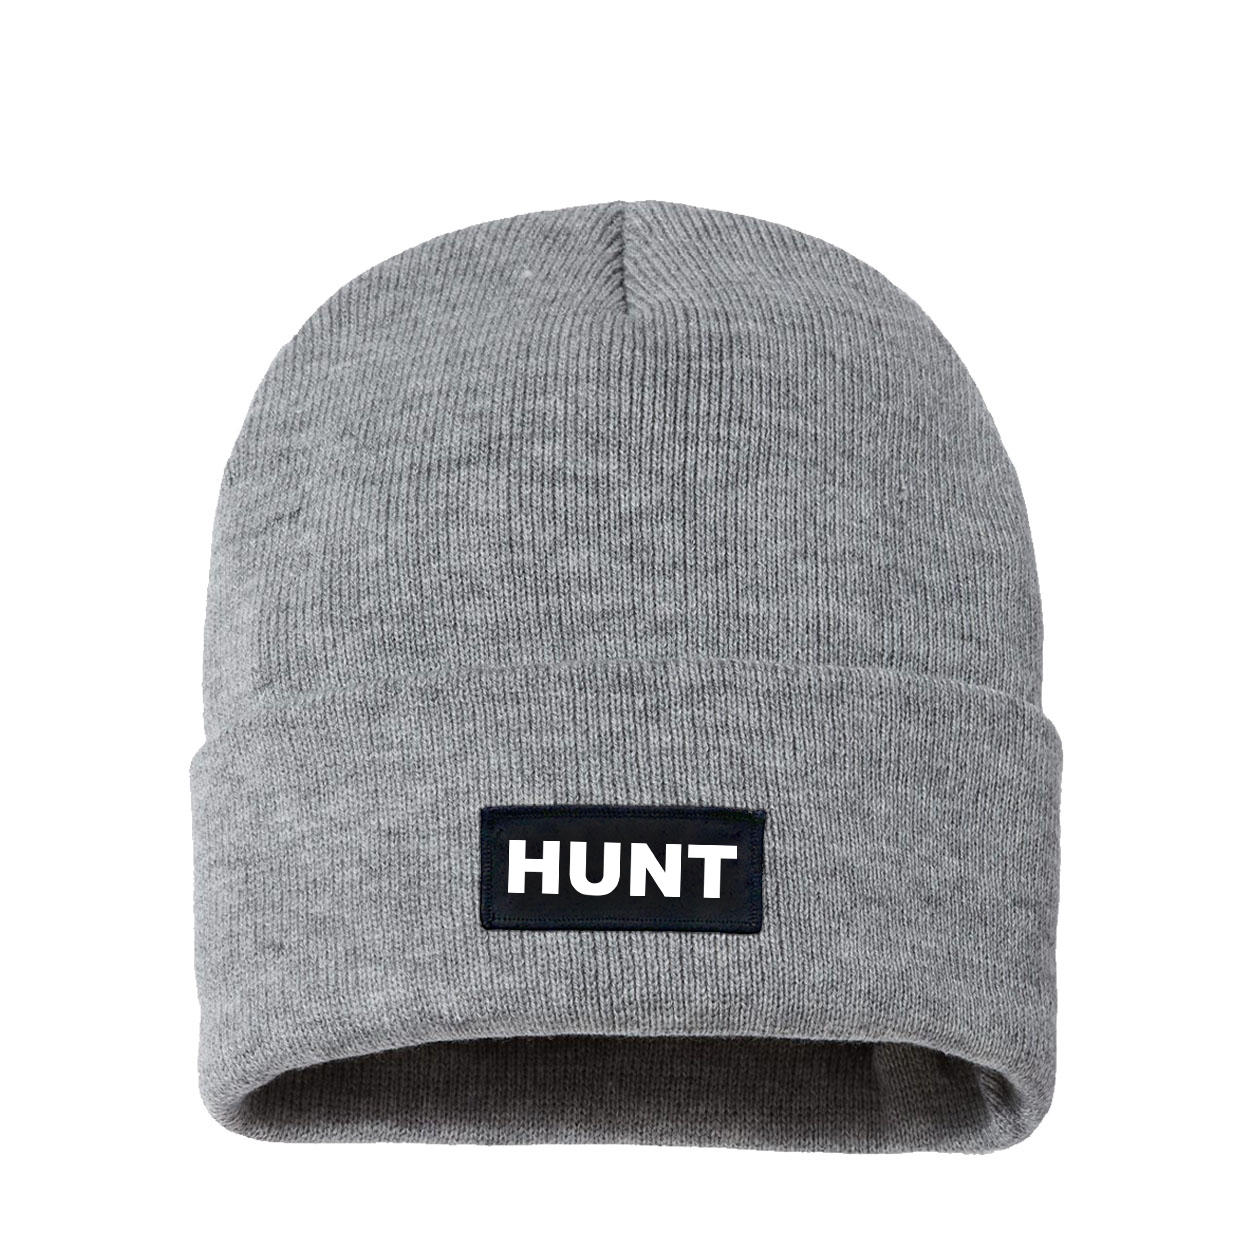 Hunt Brand Logo Night Out Woven Patch Sherpa Lined Cuffed Beanie Heather Gray (White Logo)